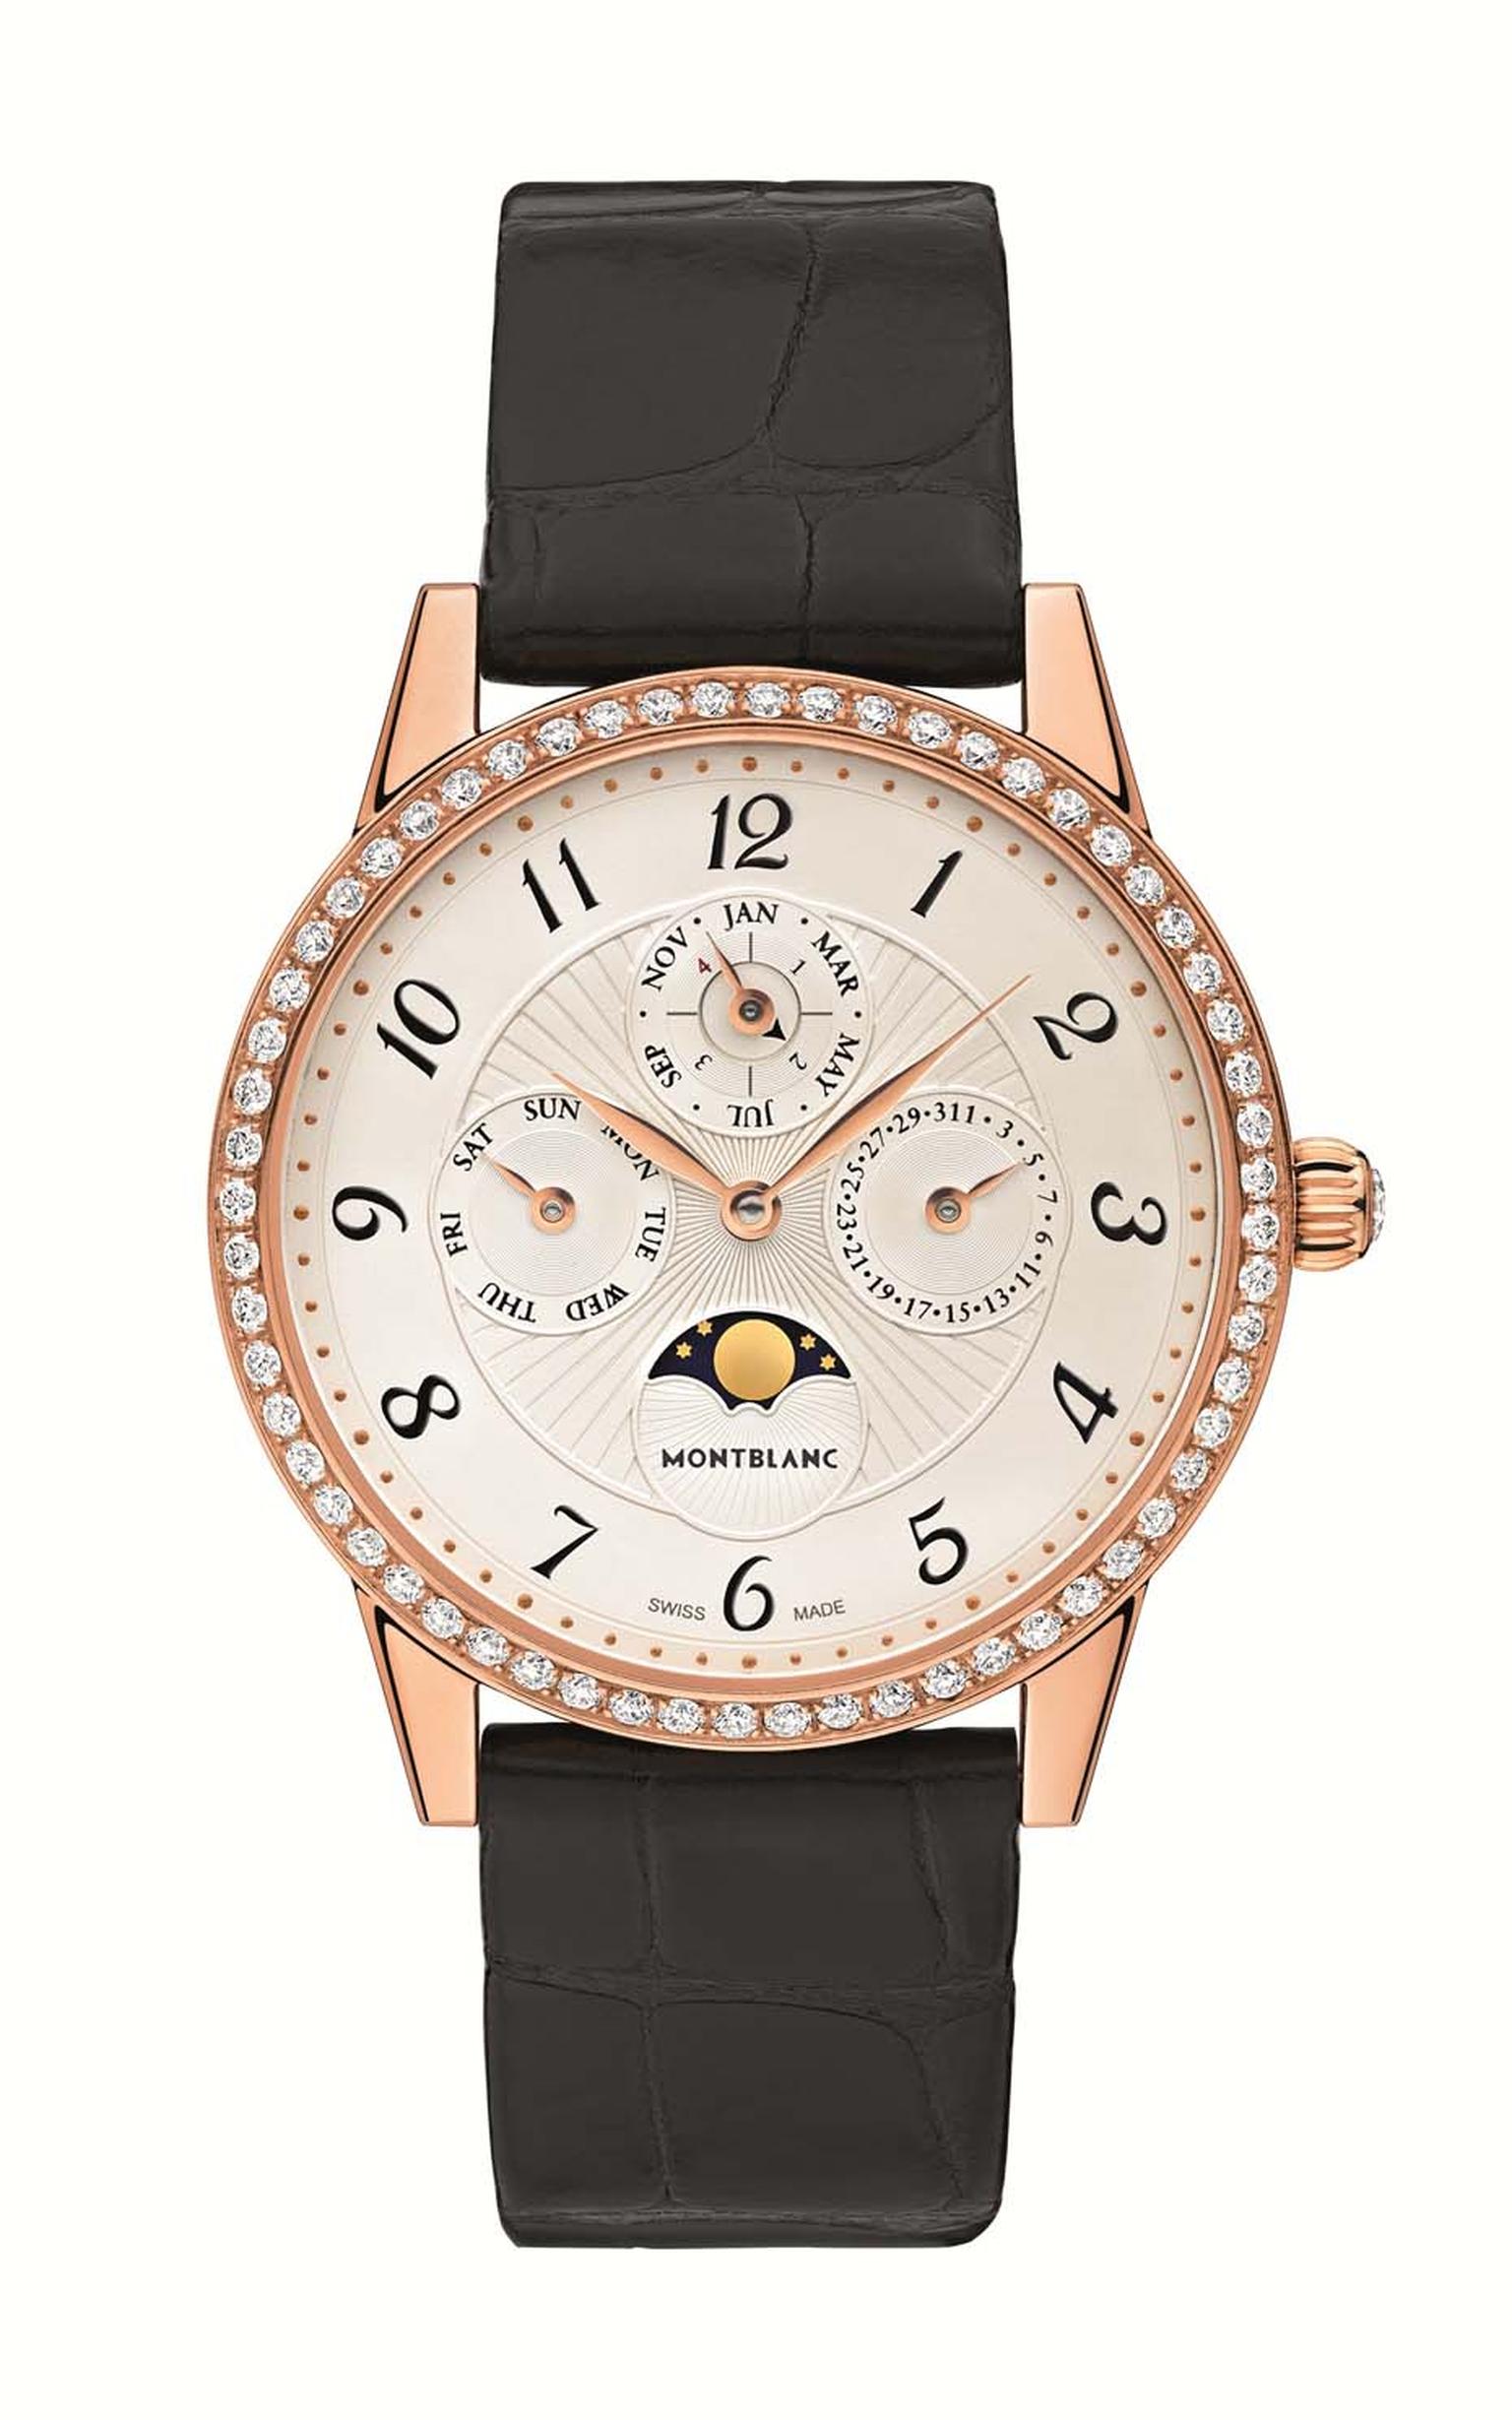 Montblanc Bohème perpetual calendar watch for women. Unlike many women’s complications, which are often just smaller versions of the pre-existing men’s watch, the Bohème collection was conceived for women, and it shows.